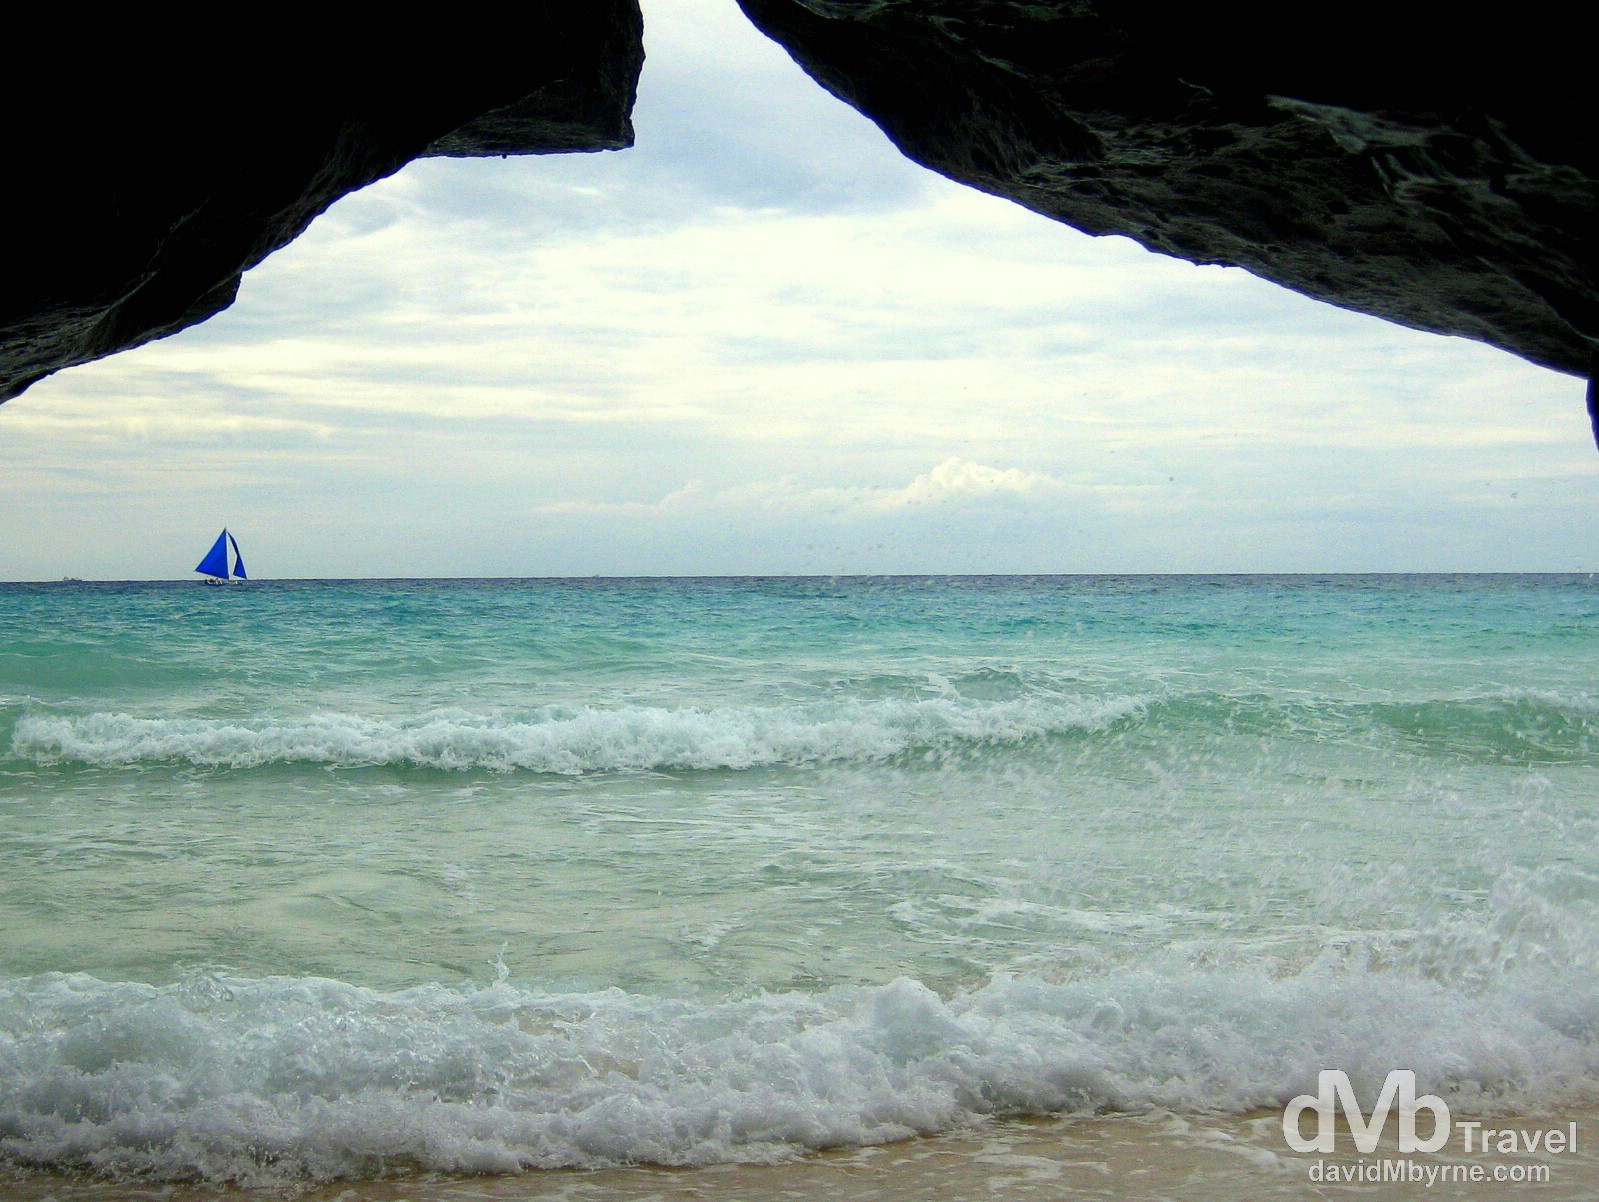 Taken from the inside for a small cave on Puka Beach, Boracay Island, Philippines. September 24th 2011.